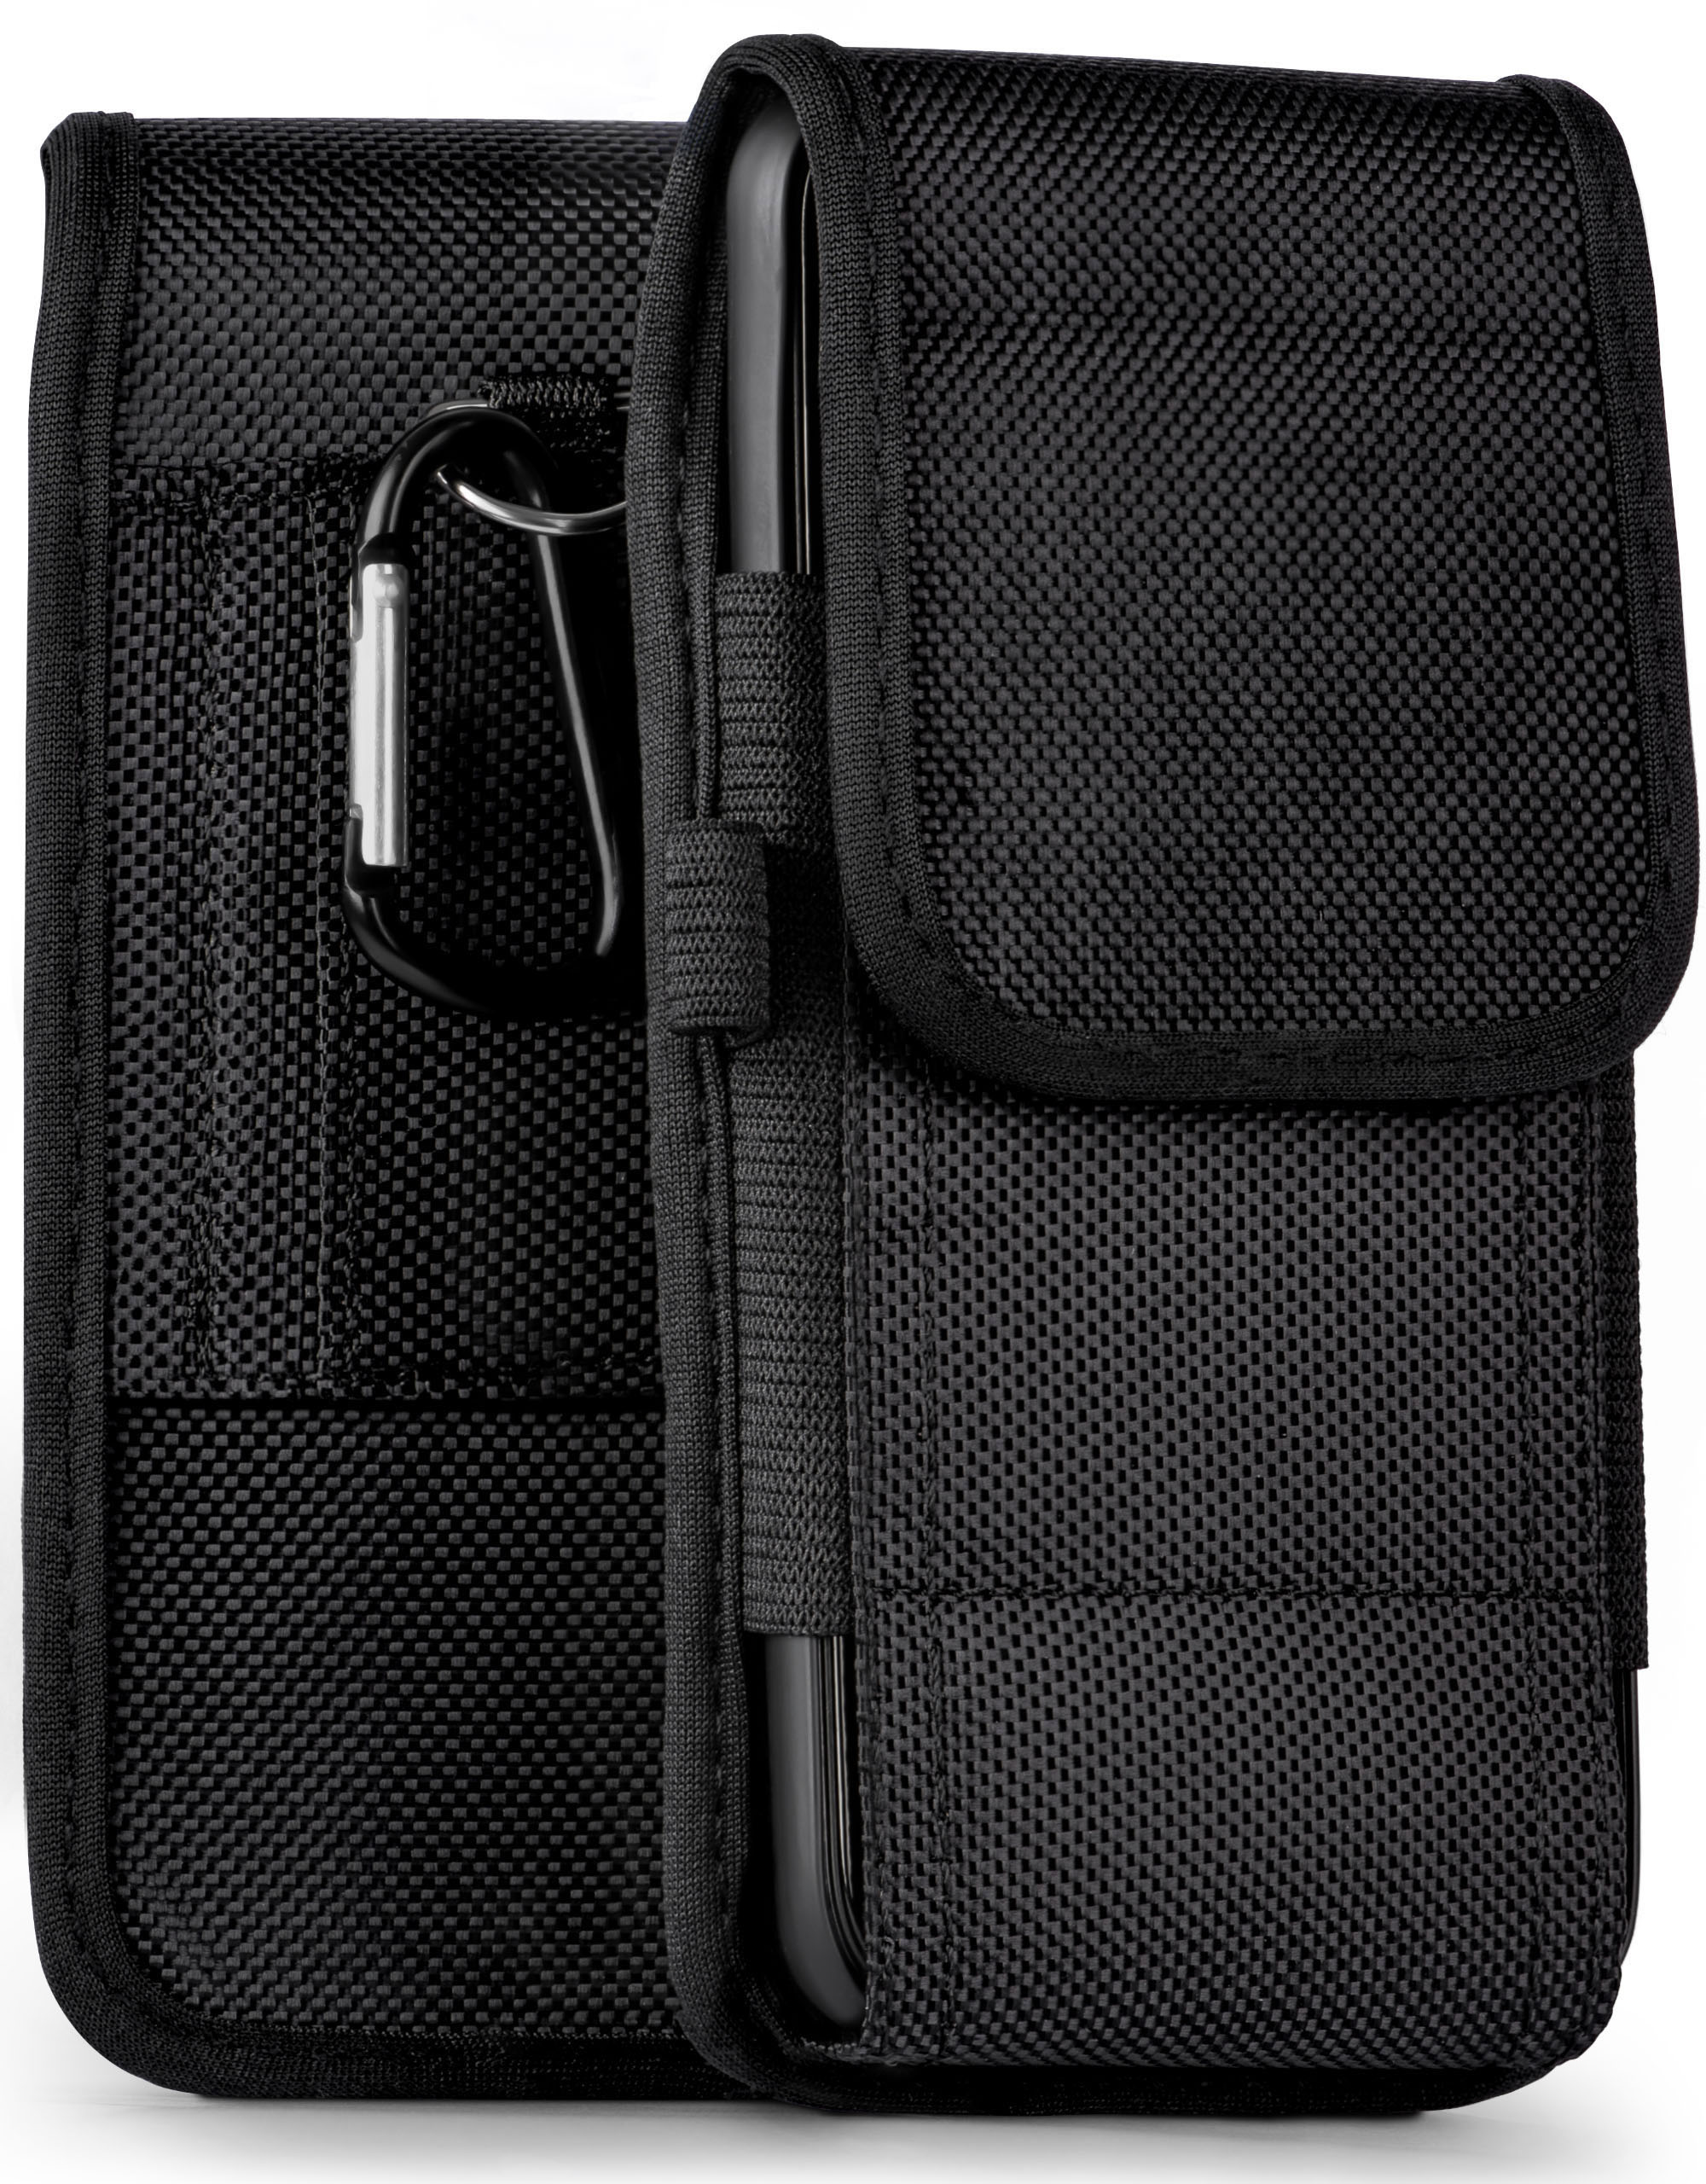 MOEX Agility Case, Cubot, Holster, P40, Trail